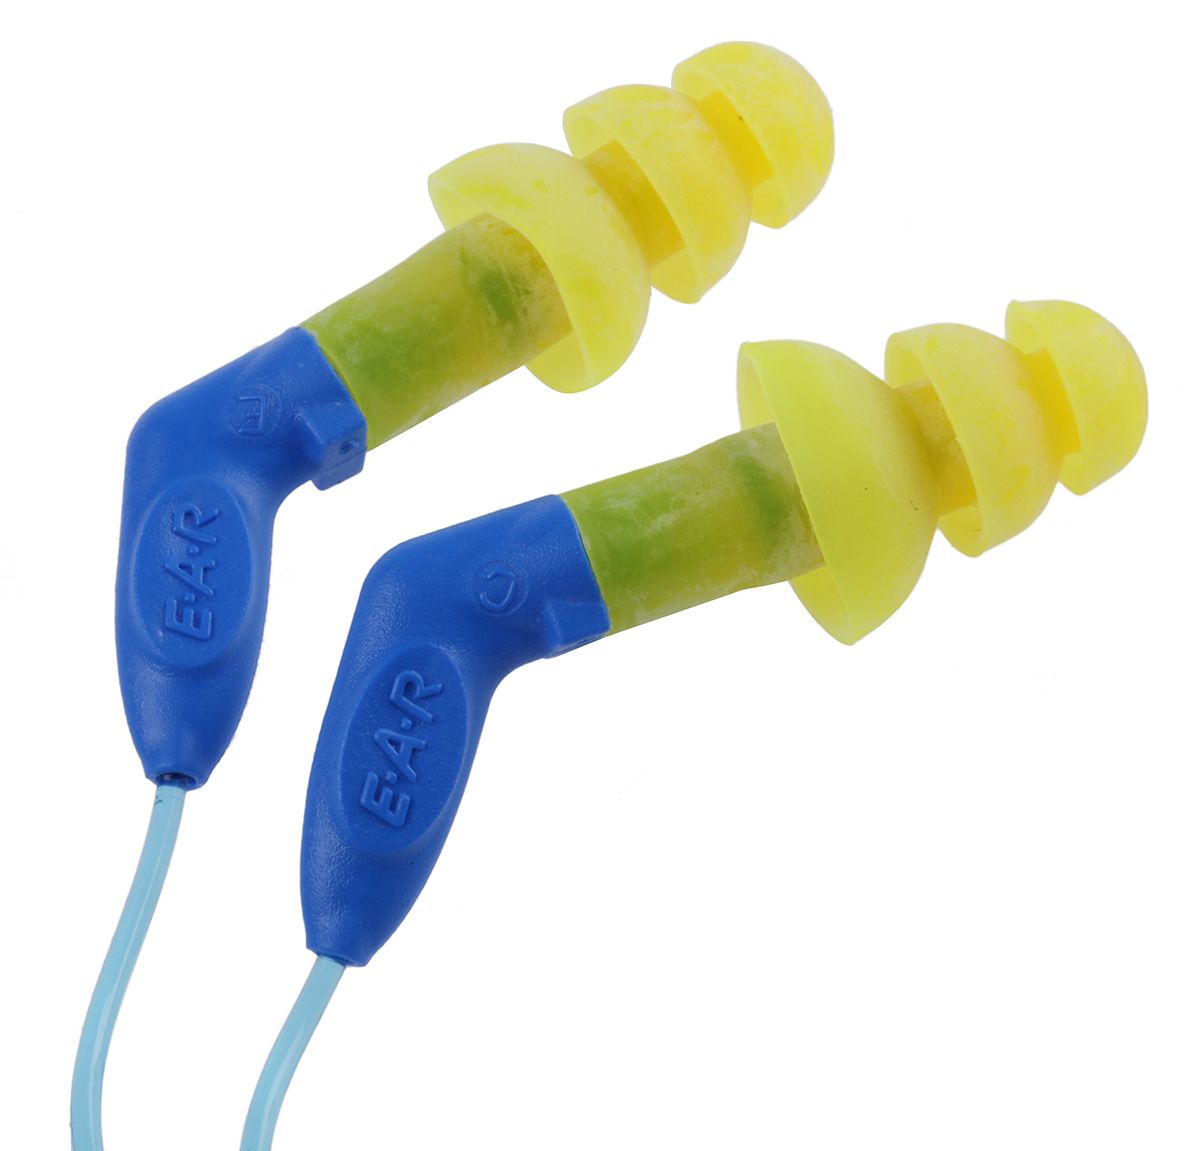 3M E.A.R Ultrafit X Corded Reusable Ear Plugs, 35dB, Yellow, 50 Pairs per Package